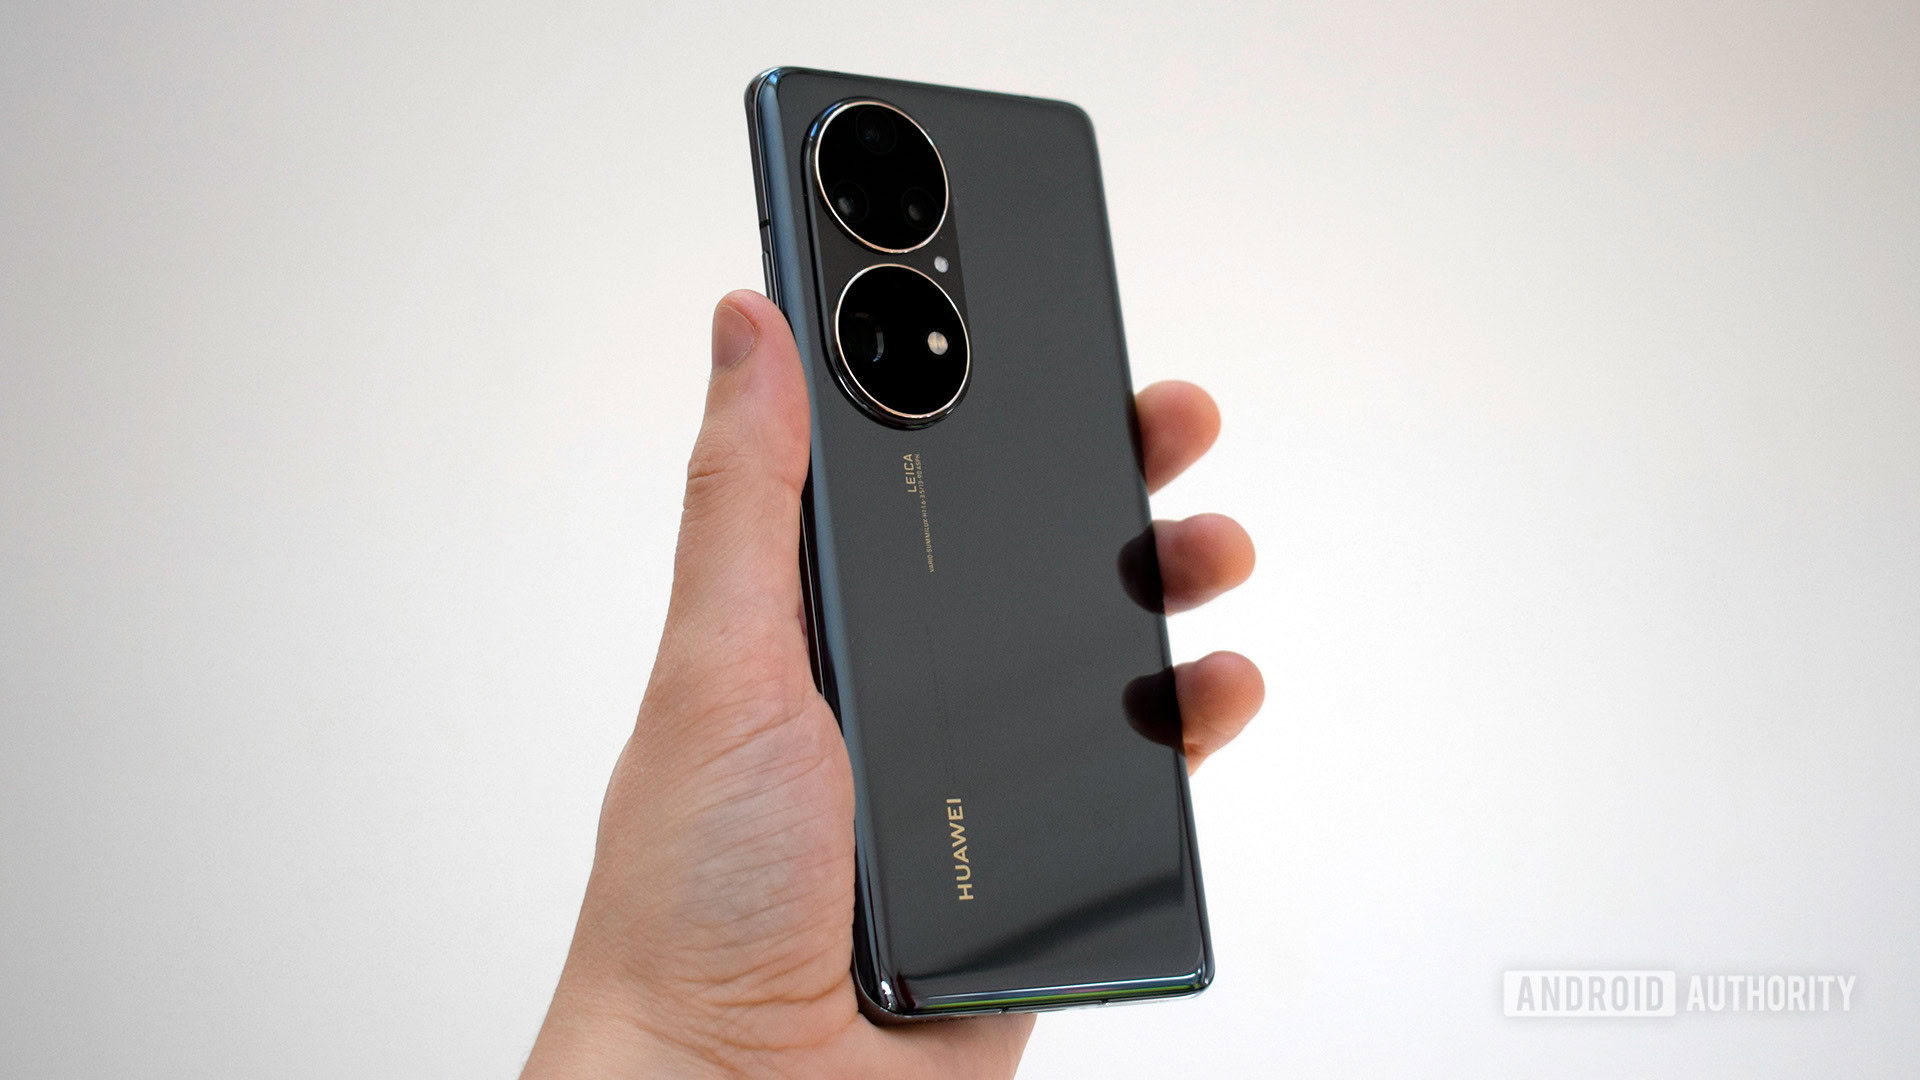 HUAWEI P50 Pro showing rear of phone held in hand